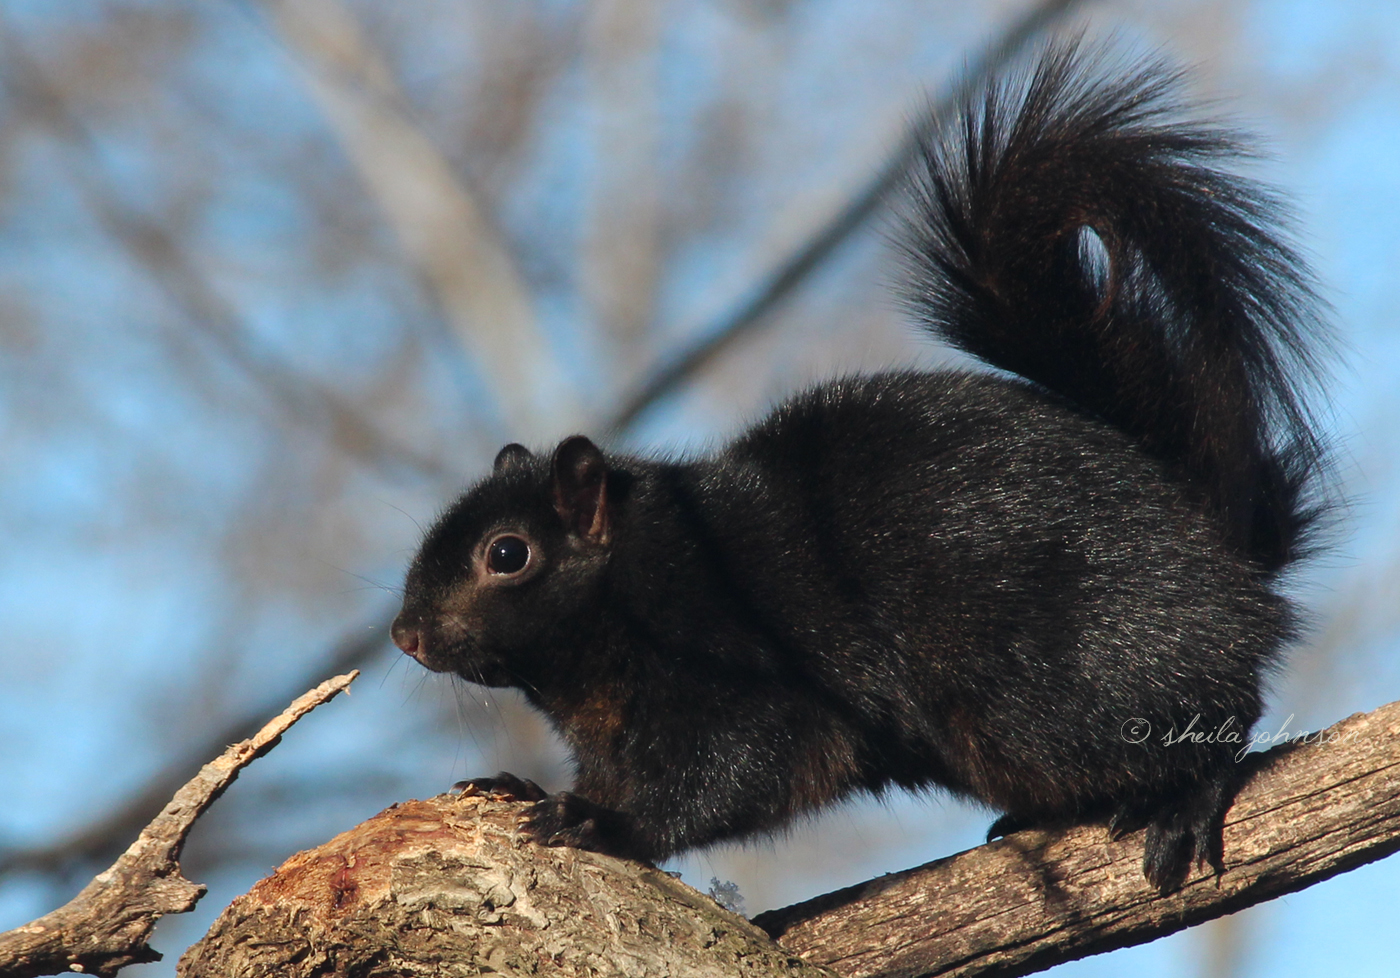 A Black Squirrel Treads Cautiously On A Branch. Black Squirrels Are A Melanistic Subgroup Of The Gray Squirrel, And, In The United States, Are Common In The Northeast And Midwest.